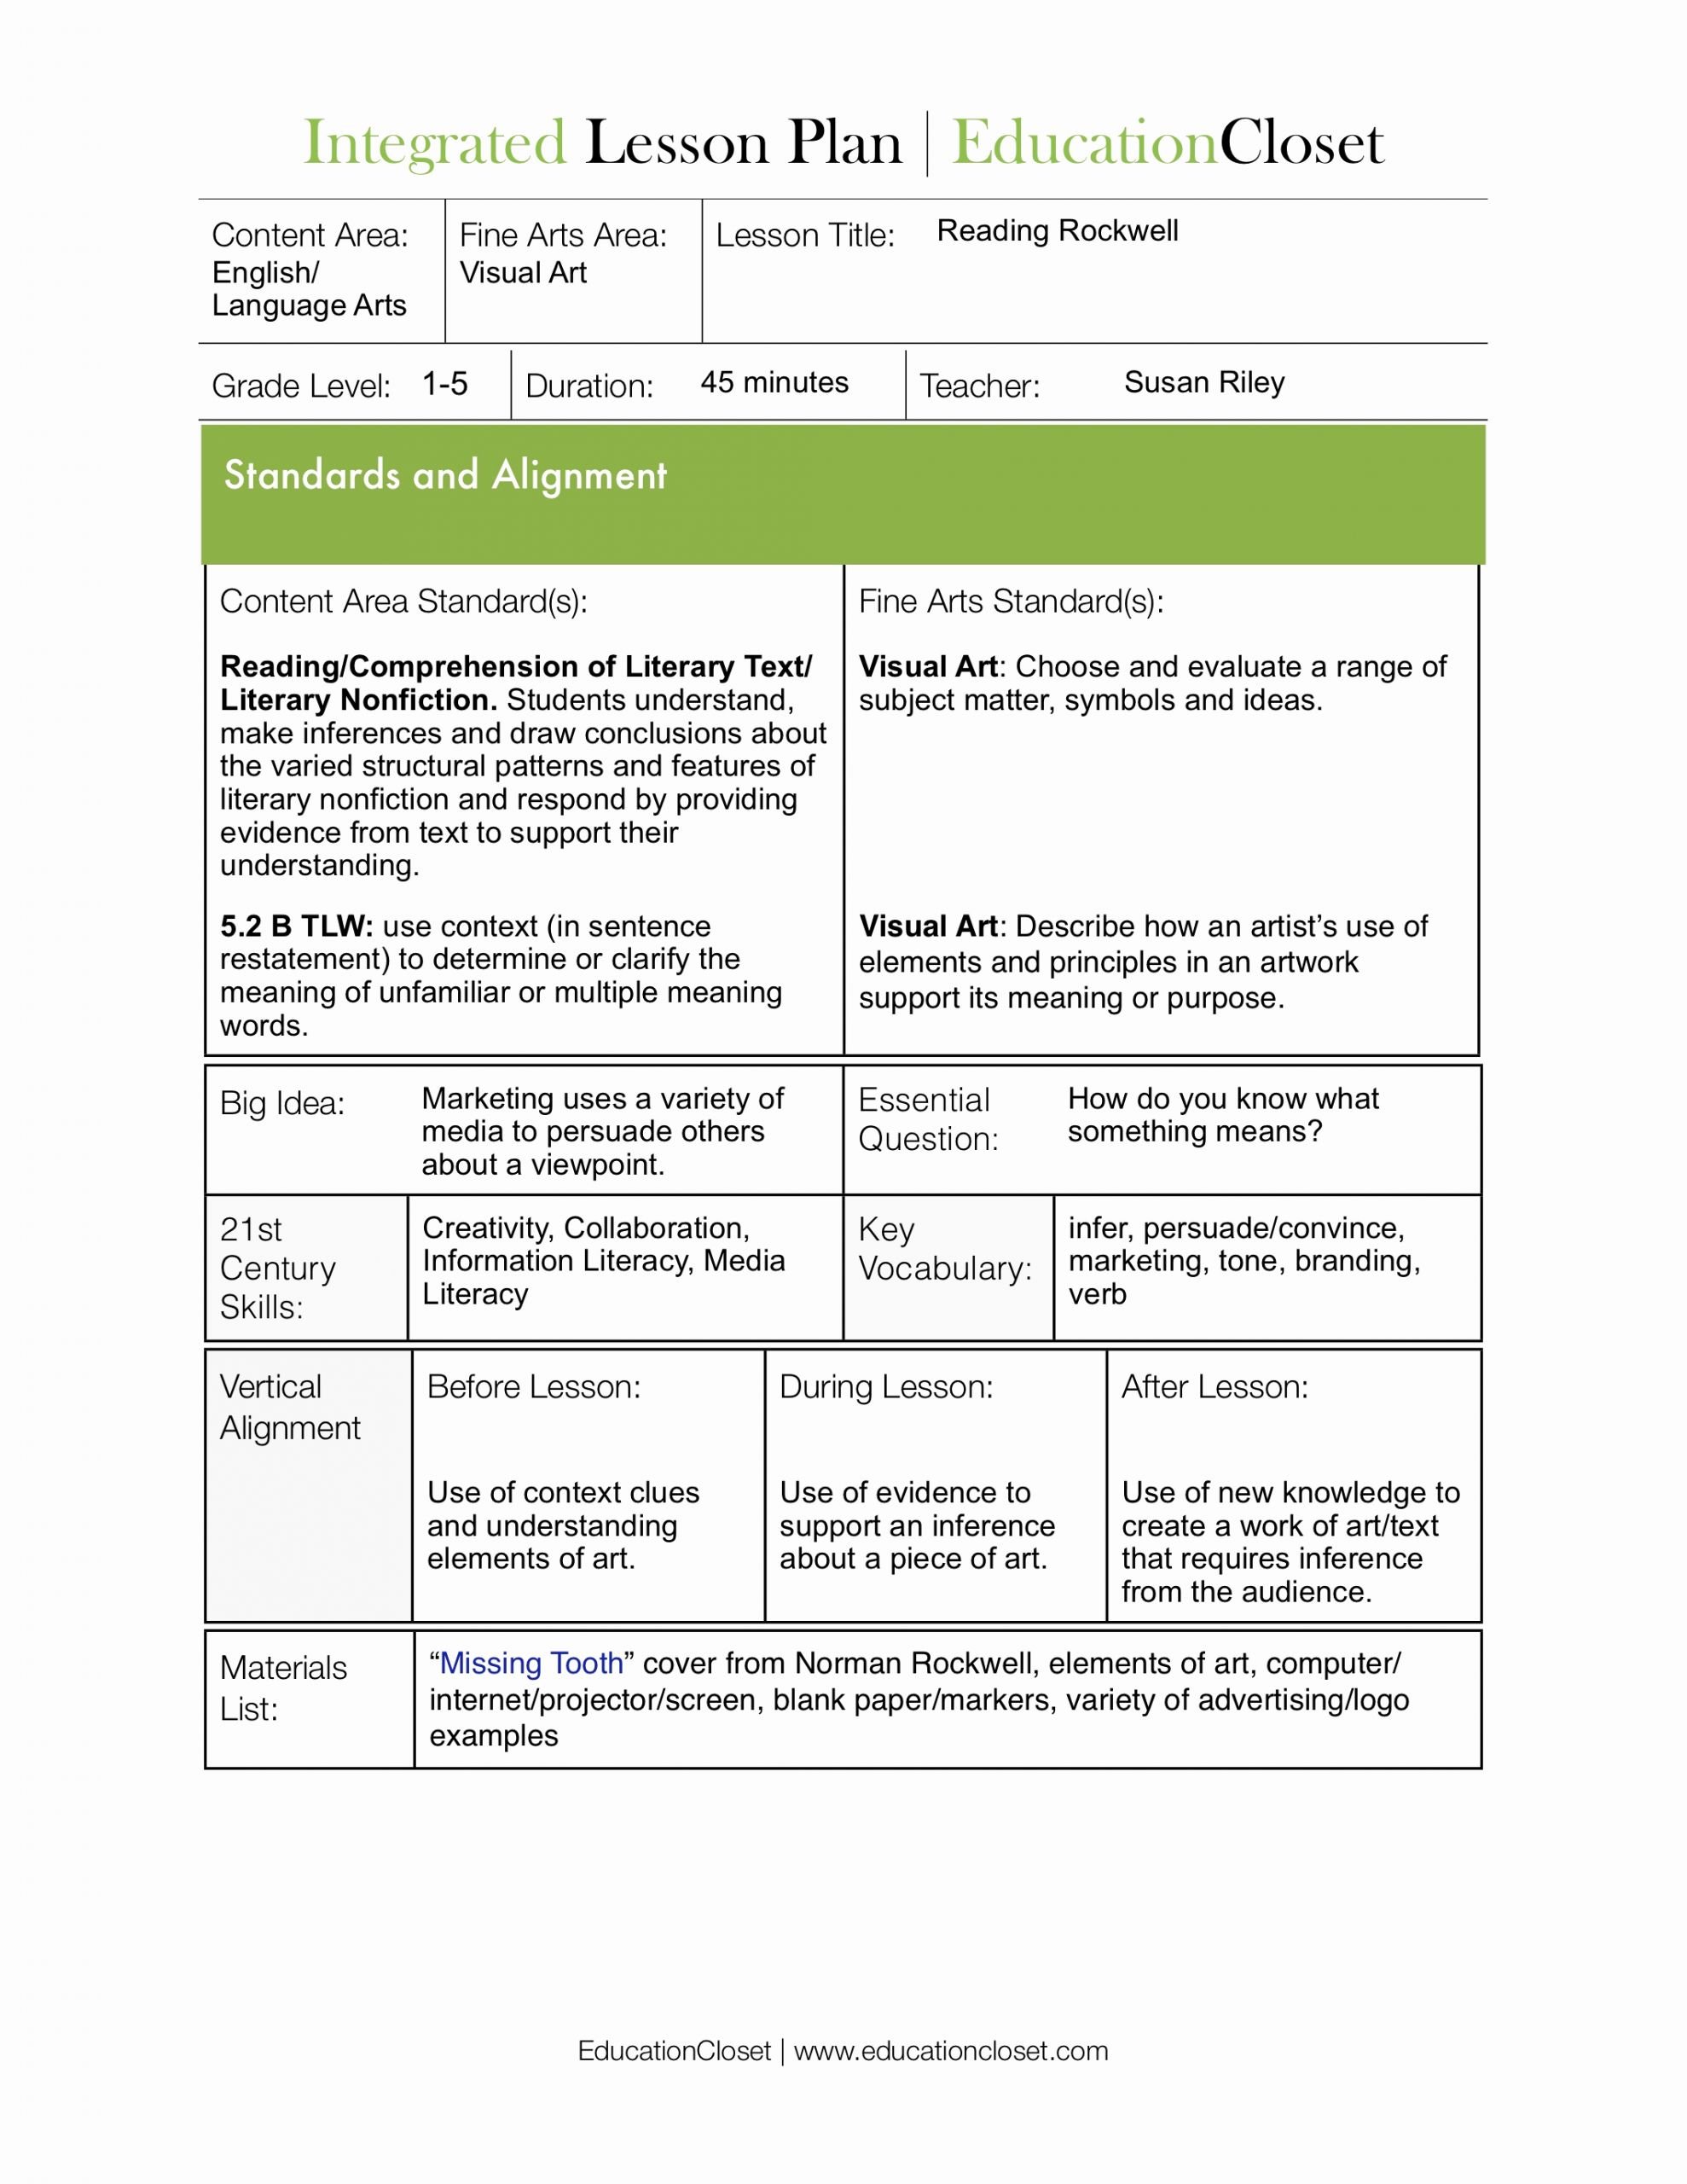 Integrated Lesson Plan Template Luxury Moving From Lesson Seeds to Lesson Plans